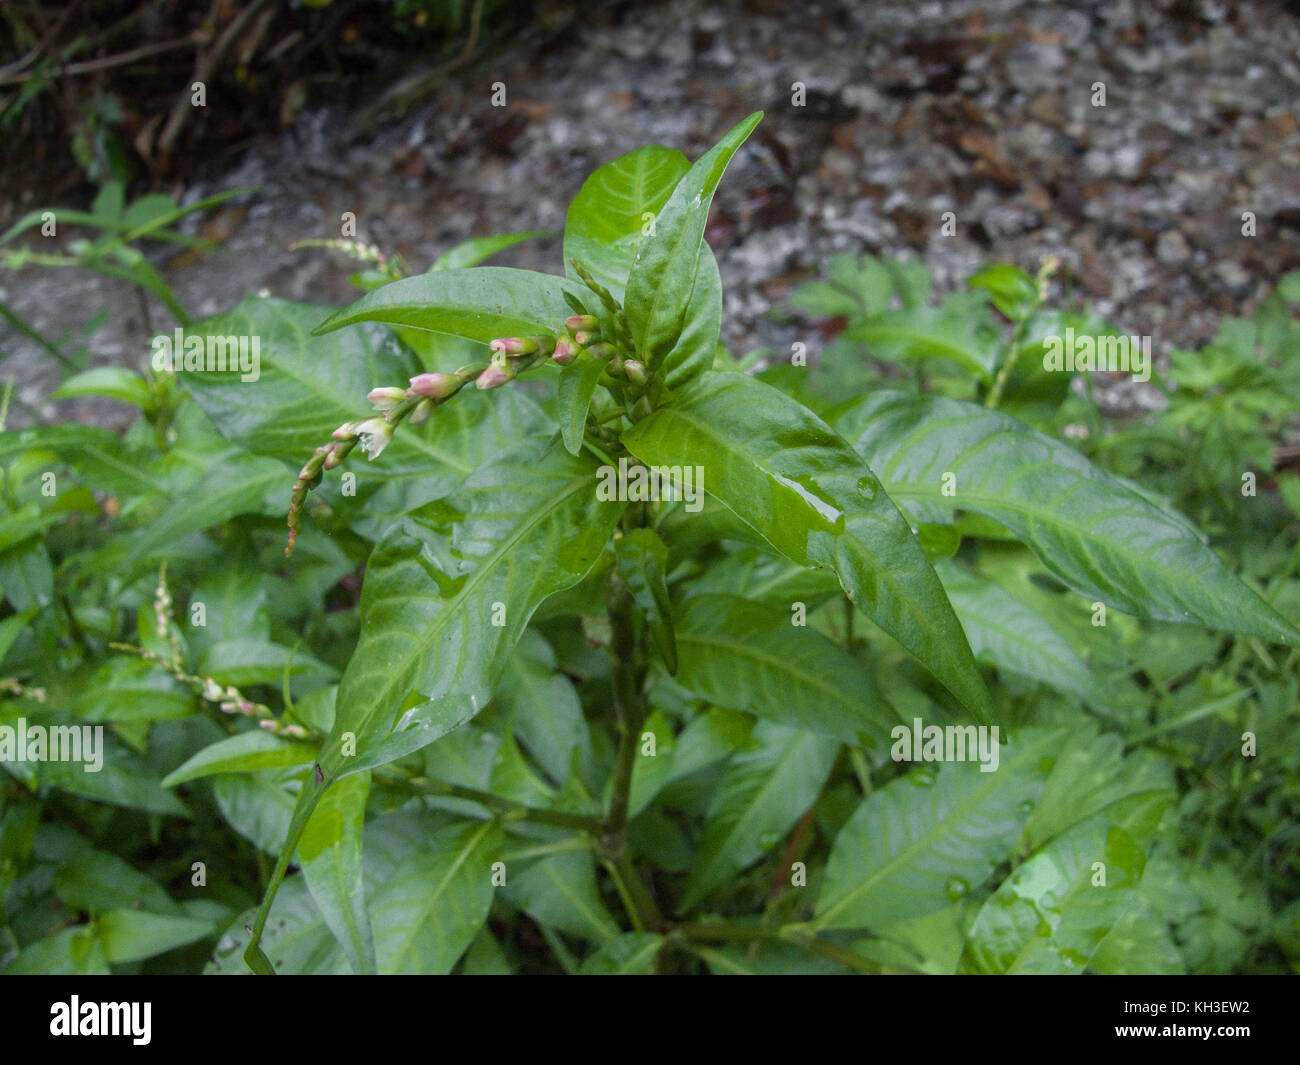 Specimen of Water Pepper / Polygonum hydropiper foliage and tops  prior to flowers opening. Sometimes used in the past in domestic folk remedies. Stock Photo